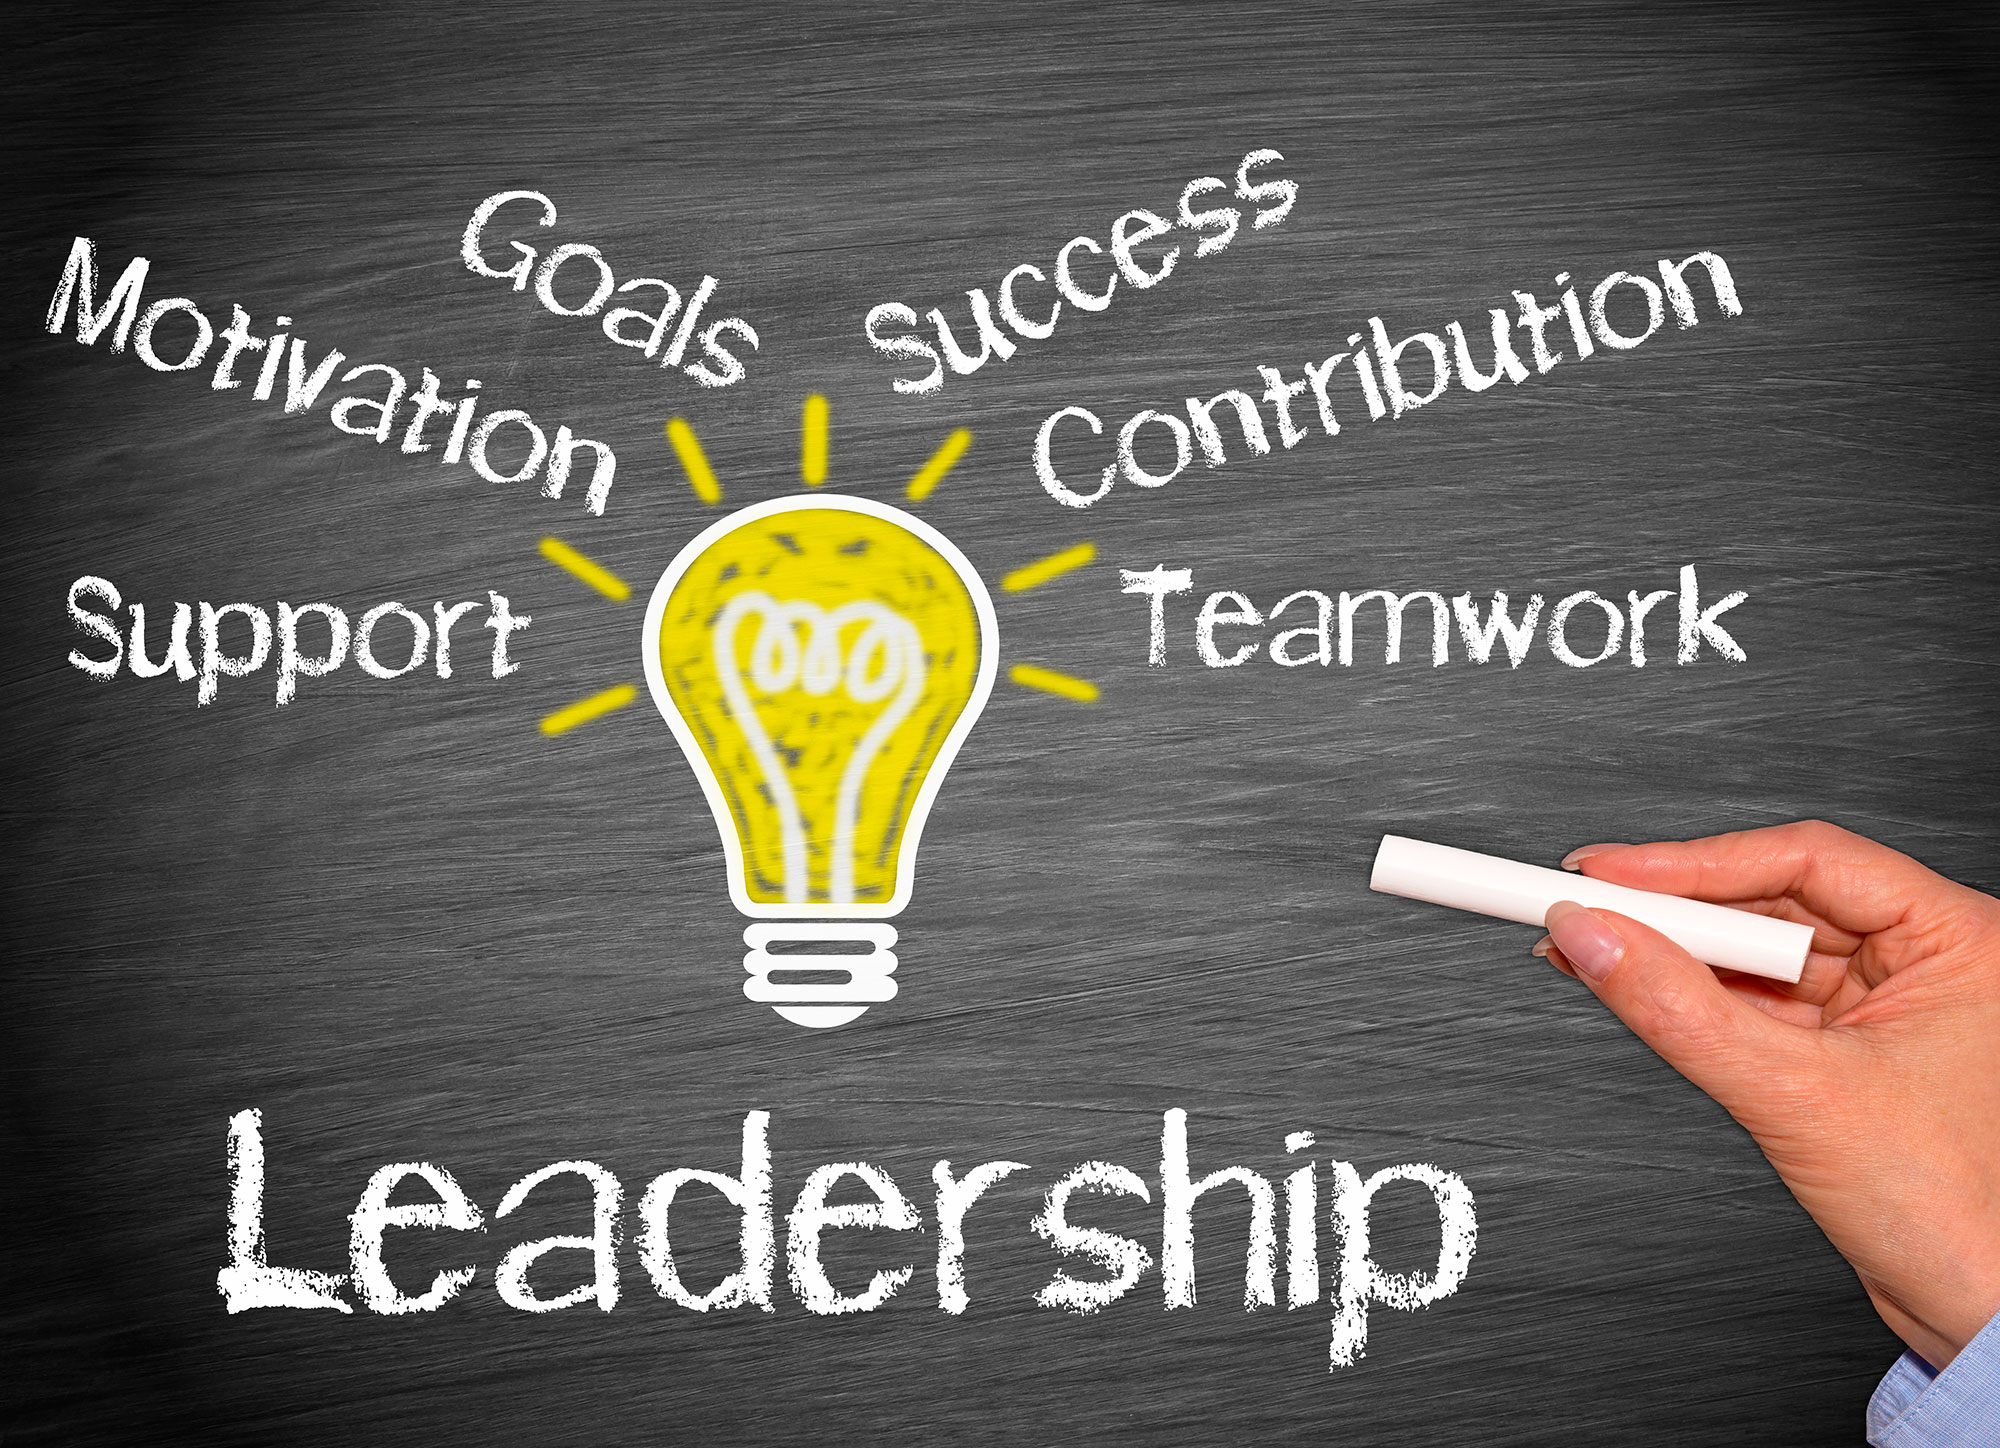 How can leaders motivate staff in order